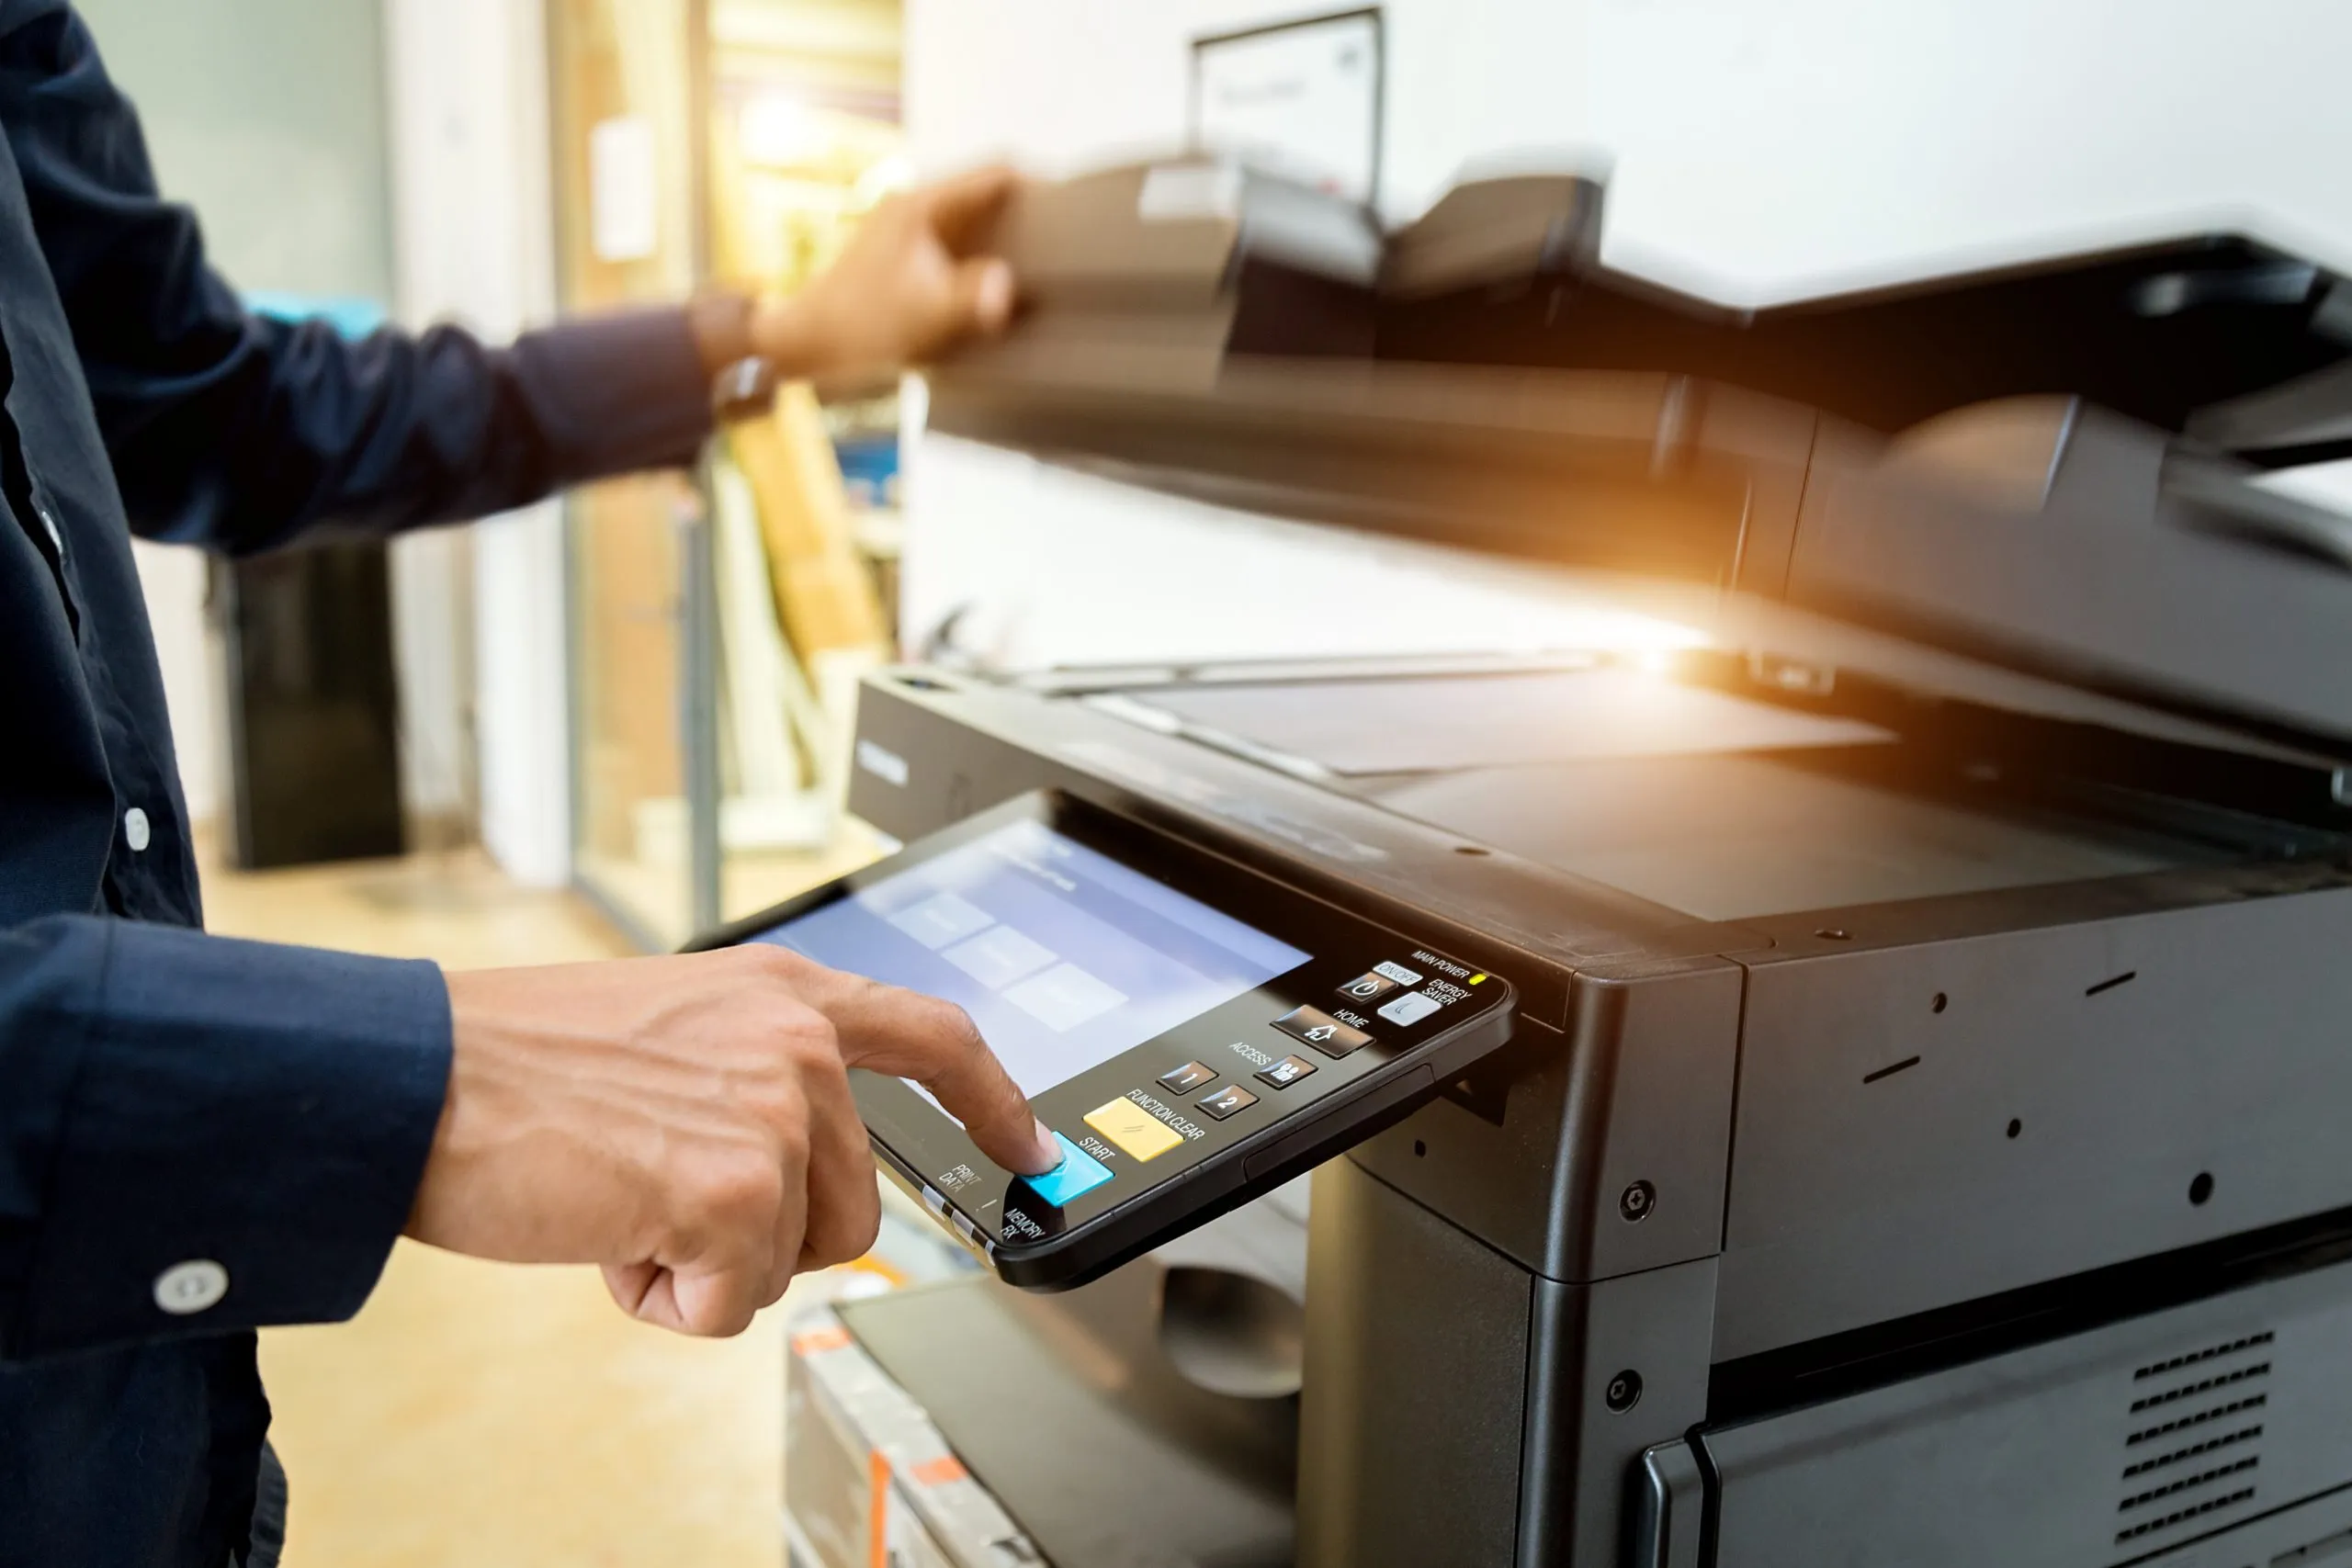 difference between local printer and network printer